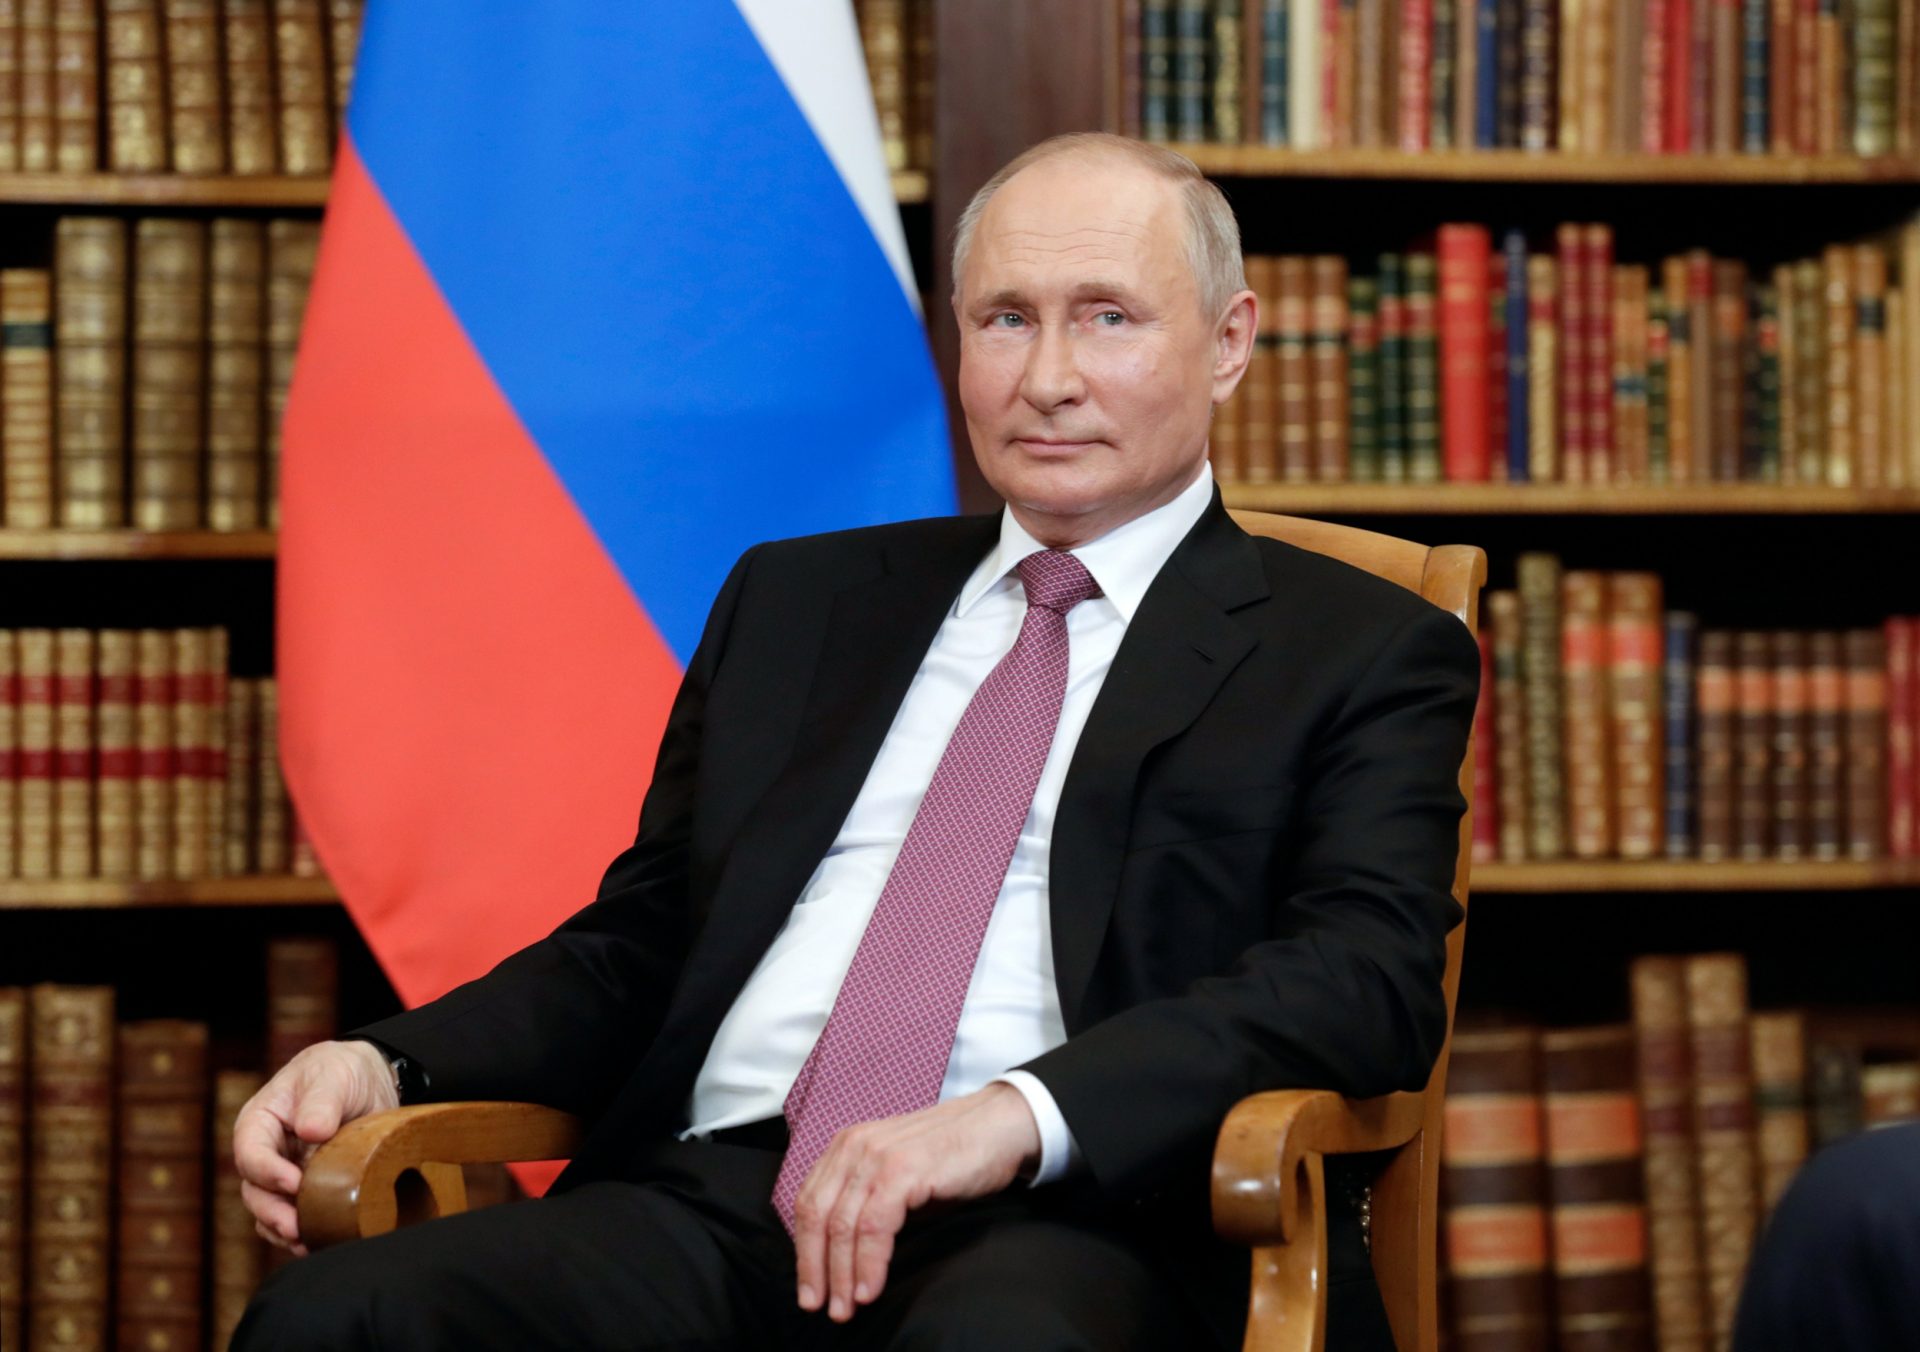 The lawful rediscovers its admiration for Vladimir Putin